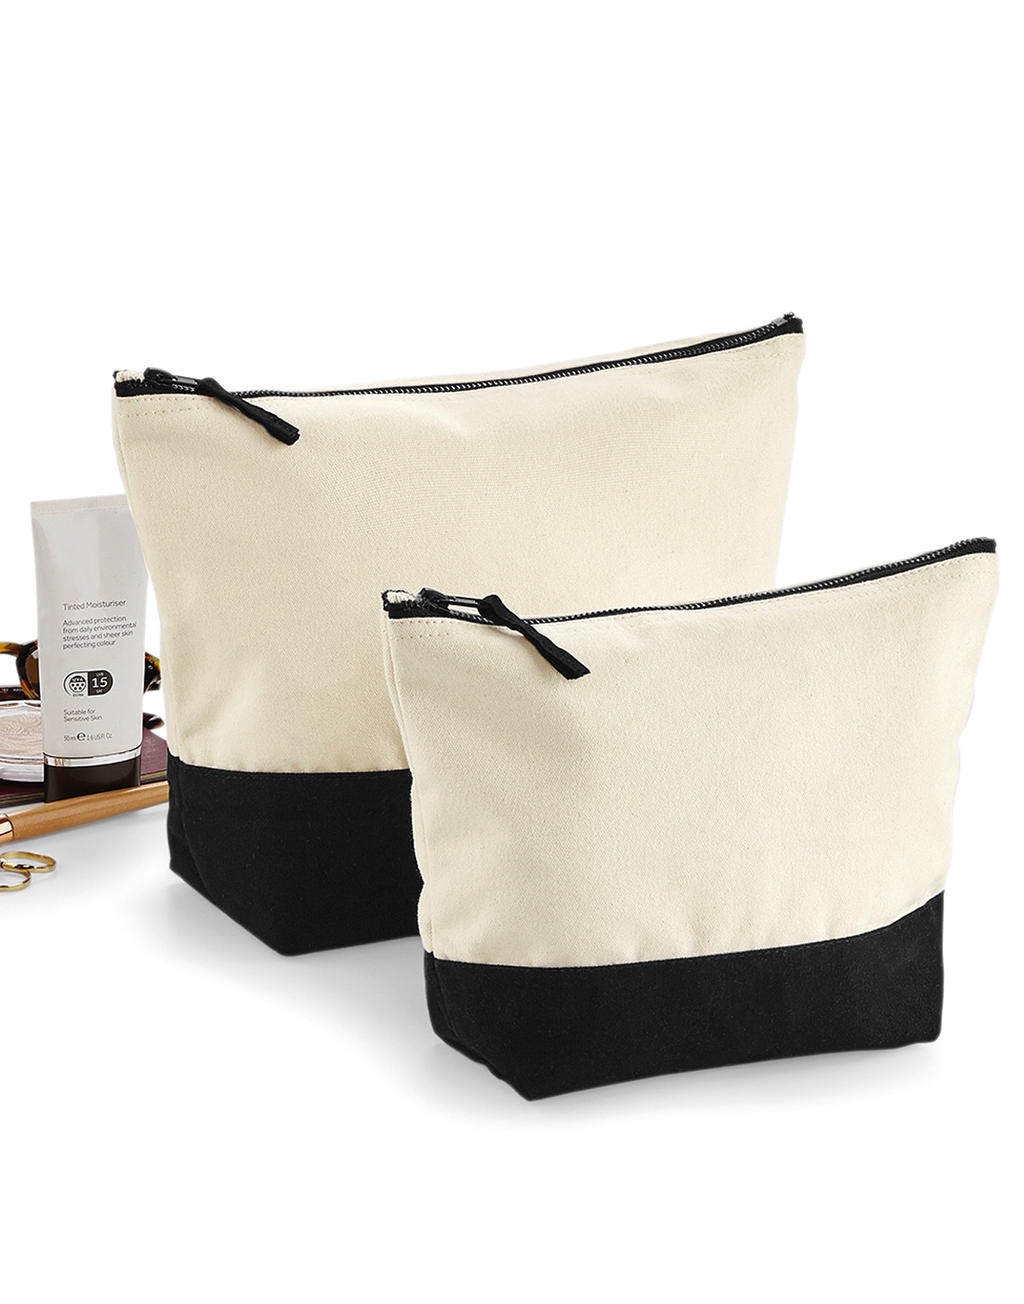  Dipped Base Canvas Accessory Bag in Farbe Natural/Black